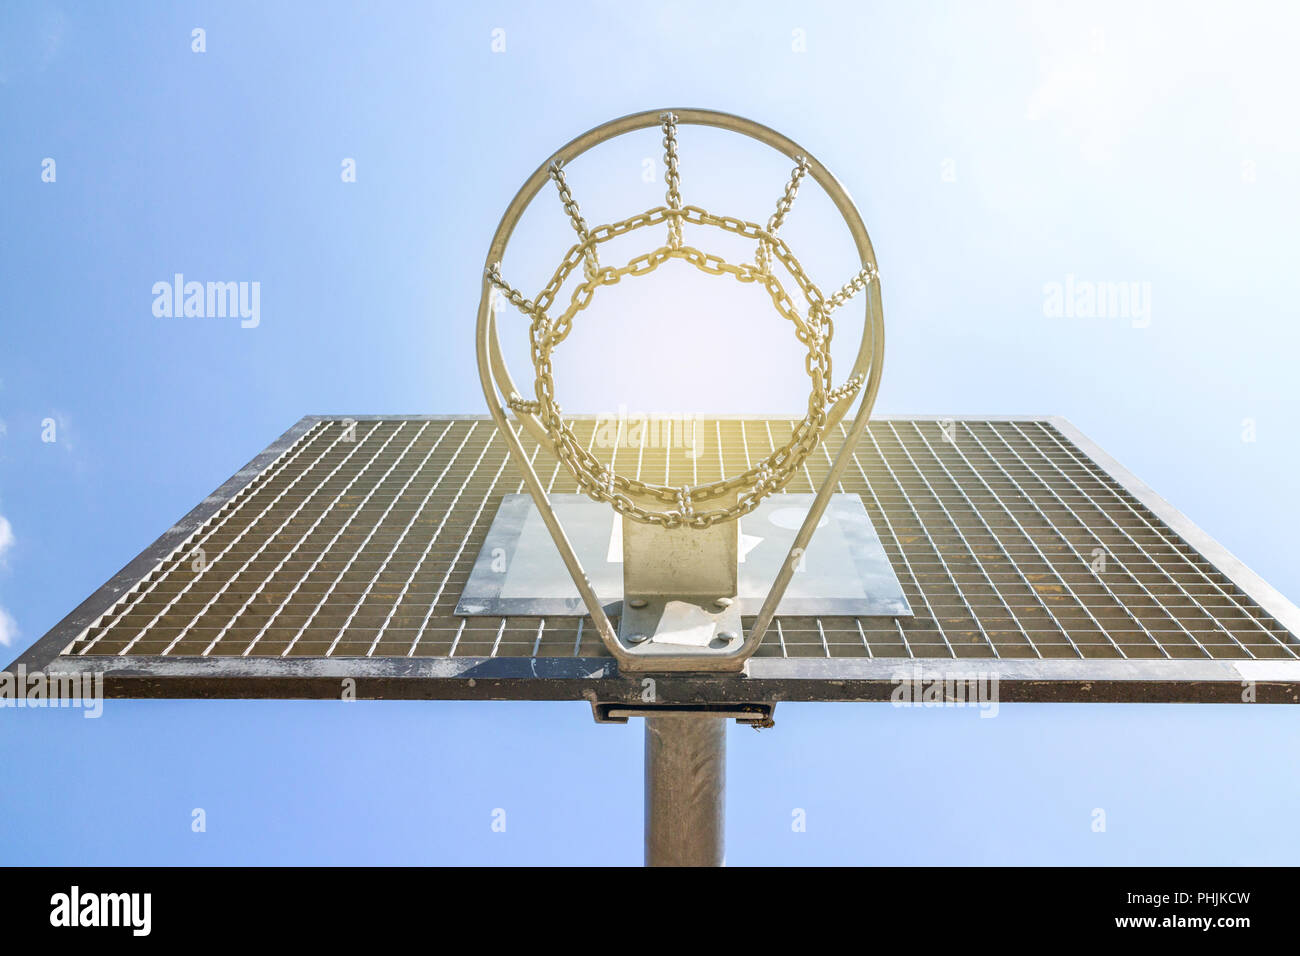 Basket-ball street ball low angle net against sky Banque D'Images